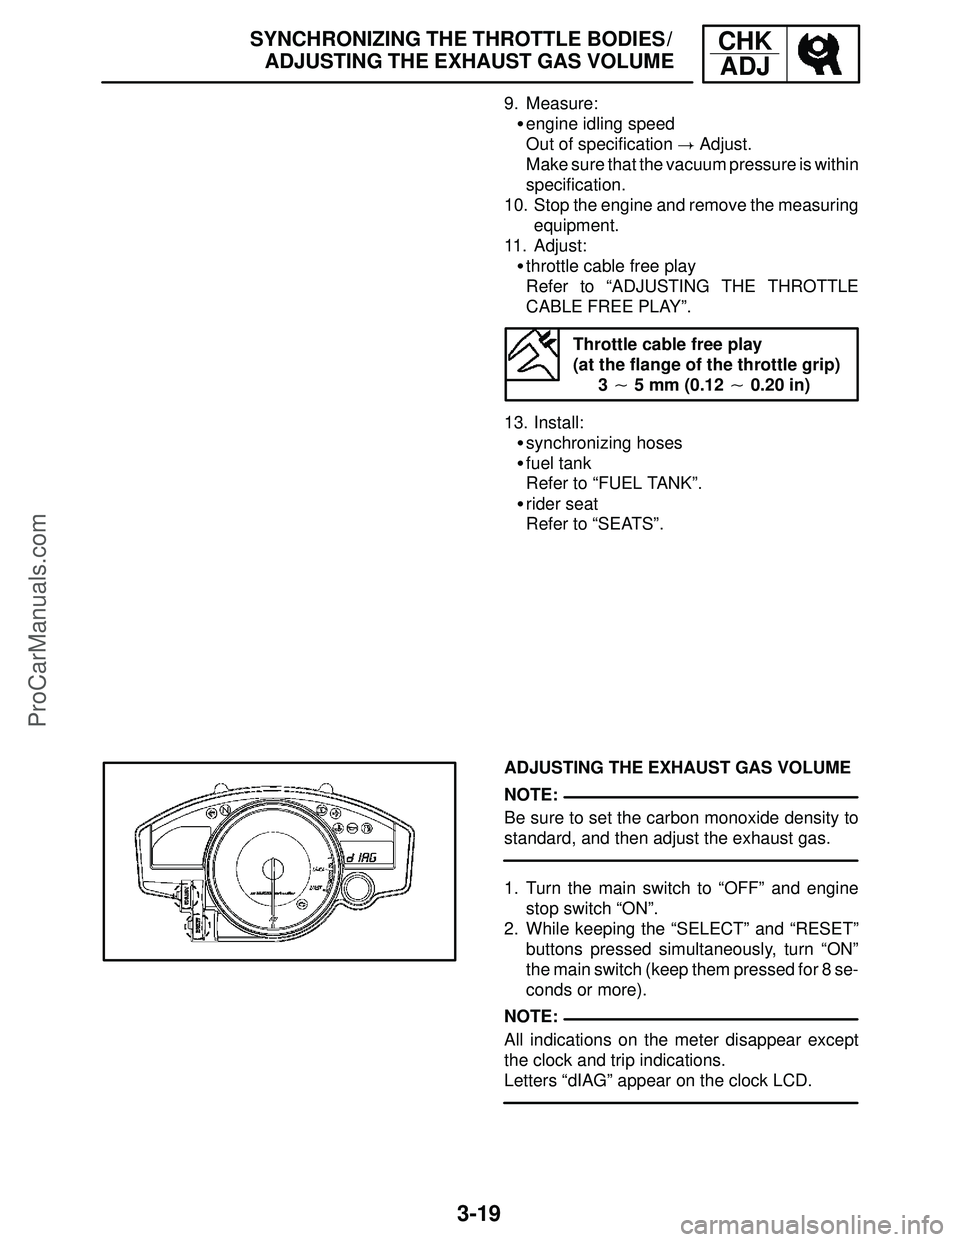 YAMAHA YZF-R1SC 2004  Service Manual 3-19
SYNCHRONIZING THE THROTTLE BODIES /
ADJUSTING THE EXHAUST GAS VOLUMECHK
ADJ
NOTE:
NOTE: 9. Measure:
engine idling speed
Out of specification  Adjust.
Make sure that the vacuum pressure is withi